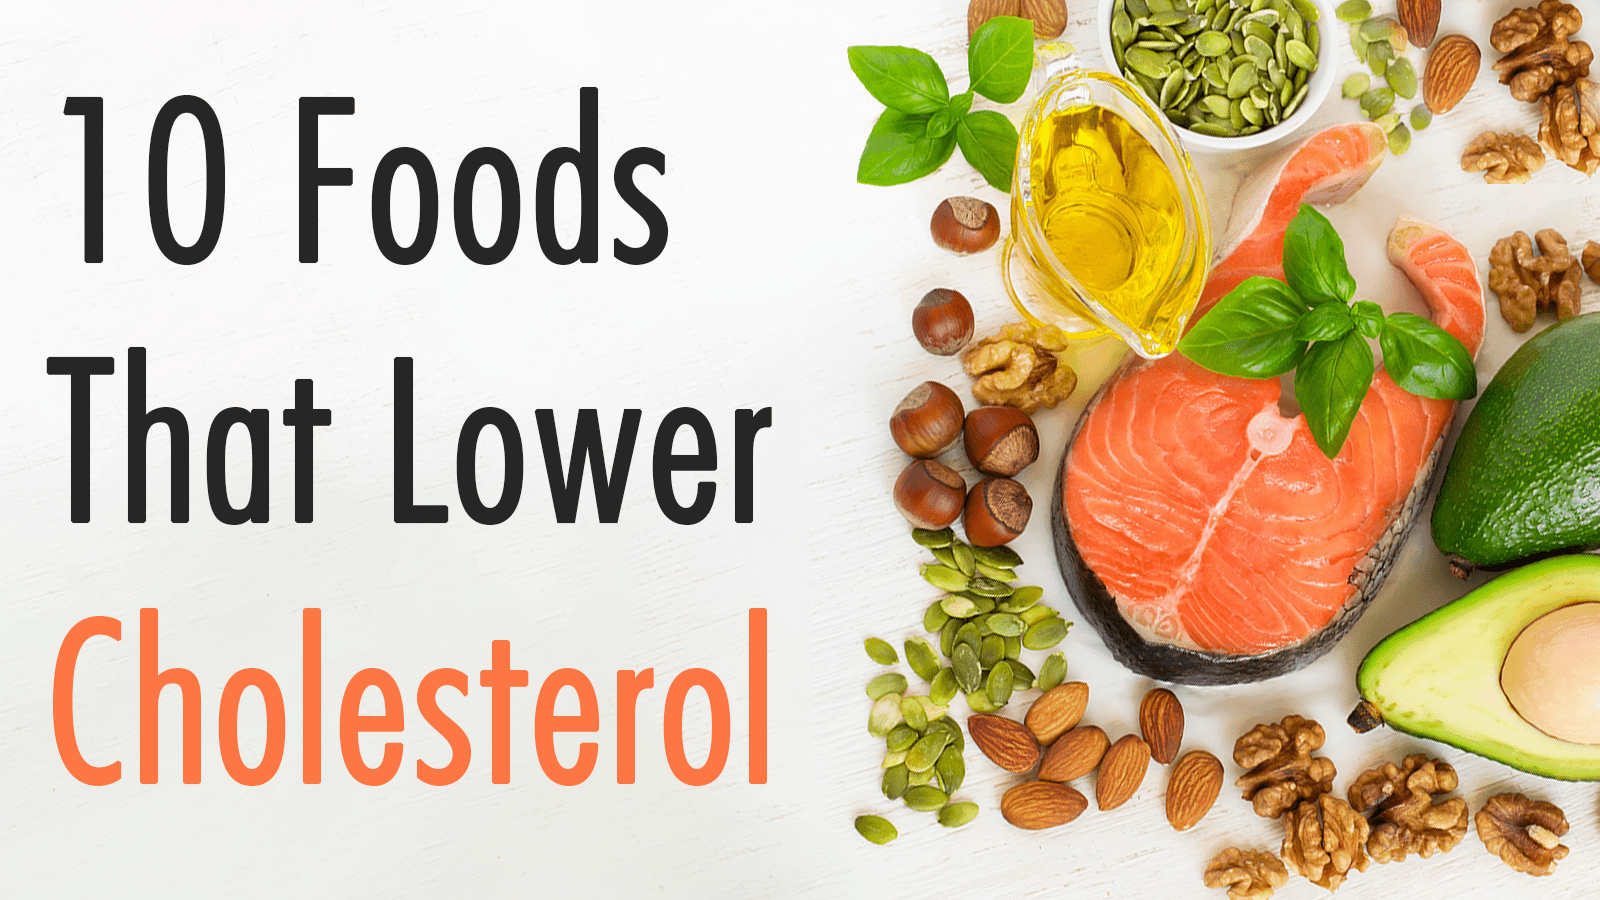 Low Cholesterol Meals : The Best Ideas for Low Cholesterol ...